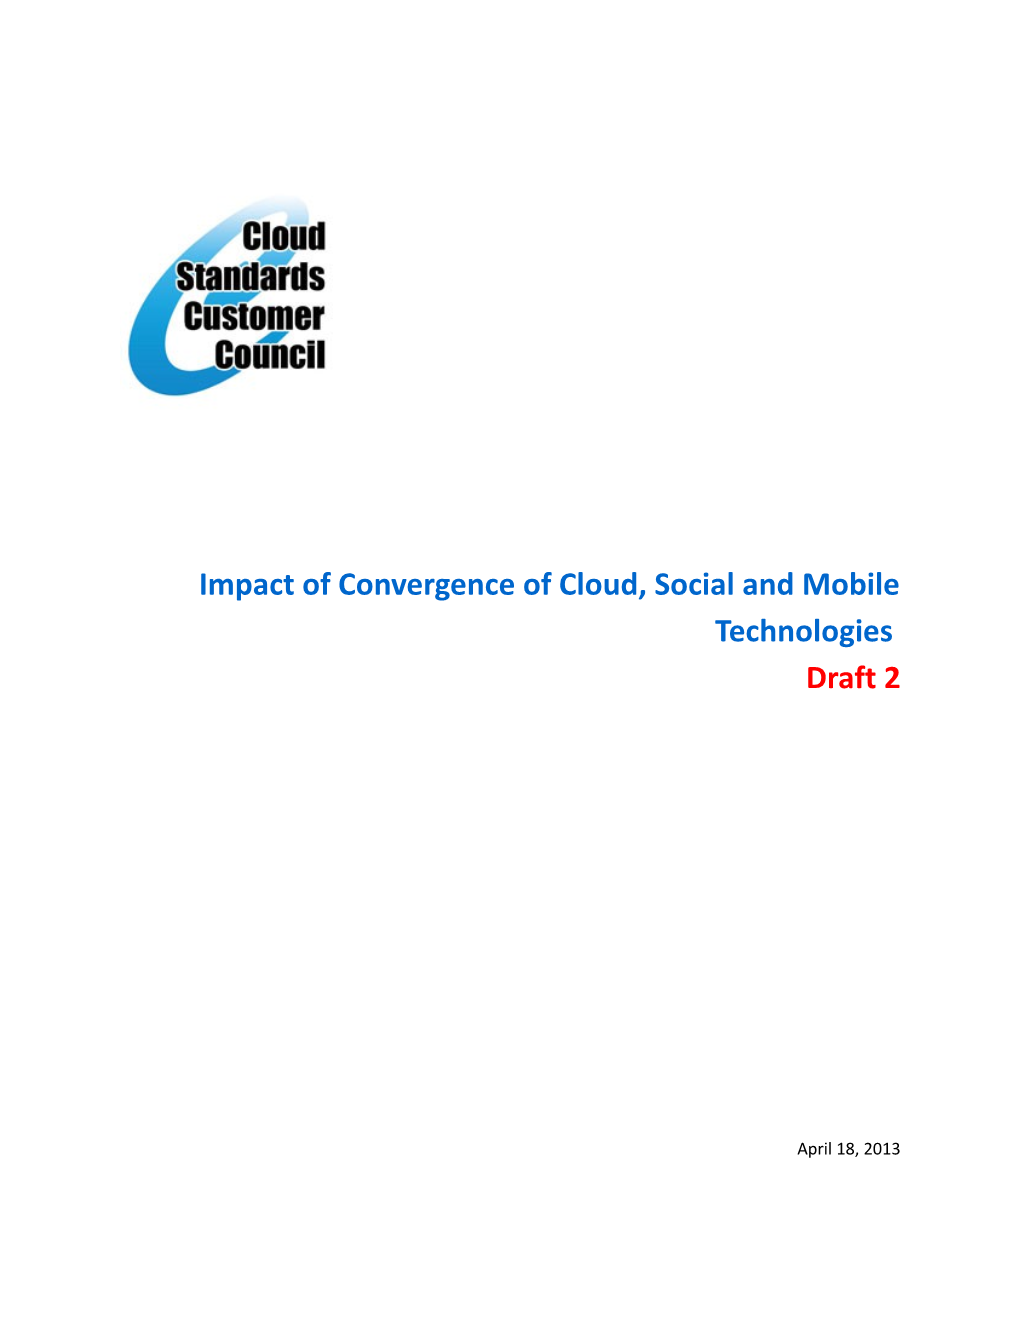 Impact of Convergence of Cloud, Socialand Mobile Technologies